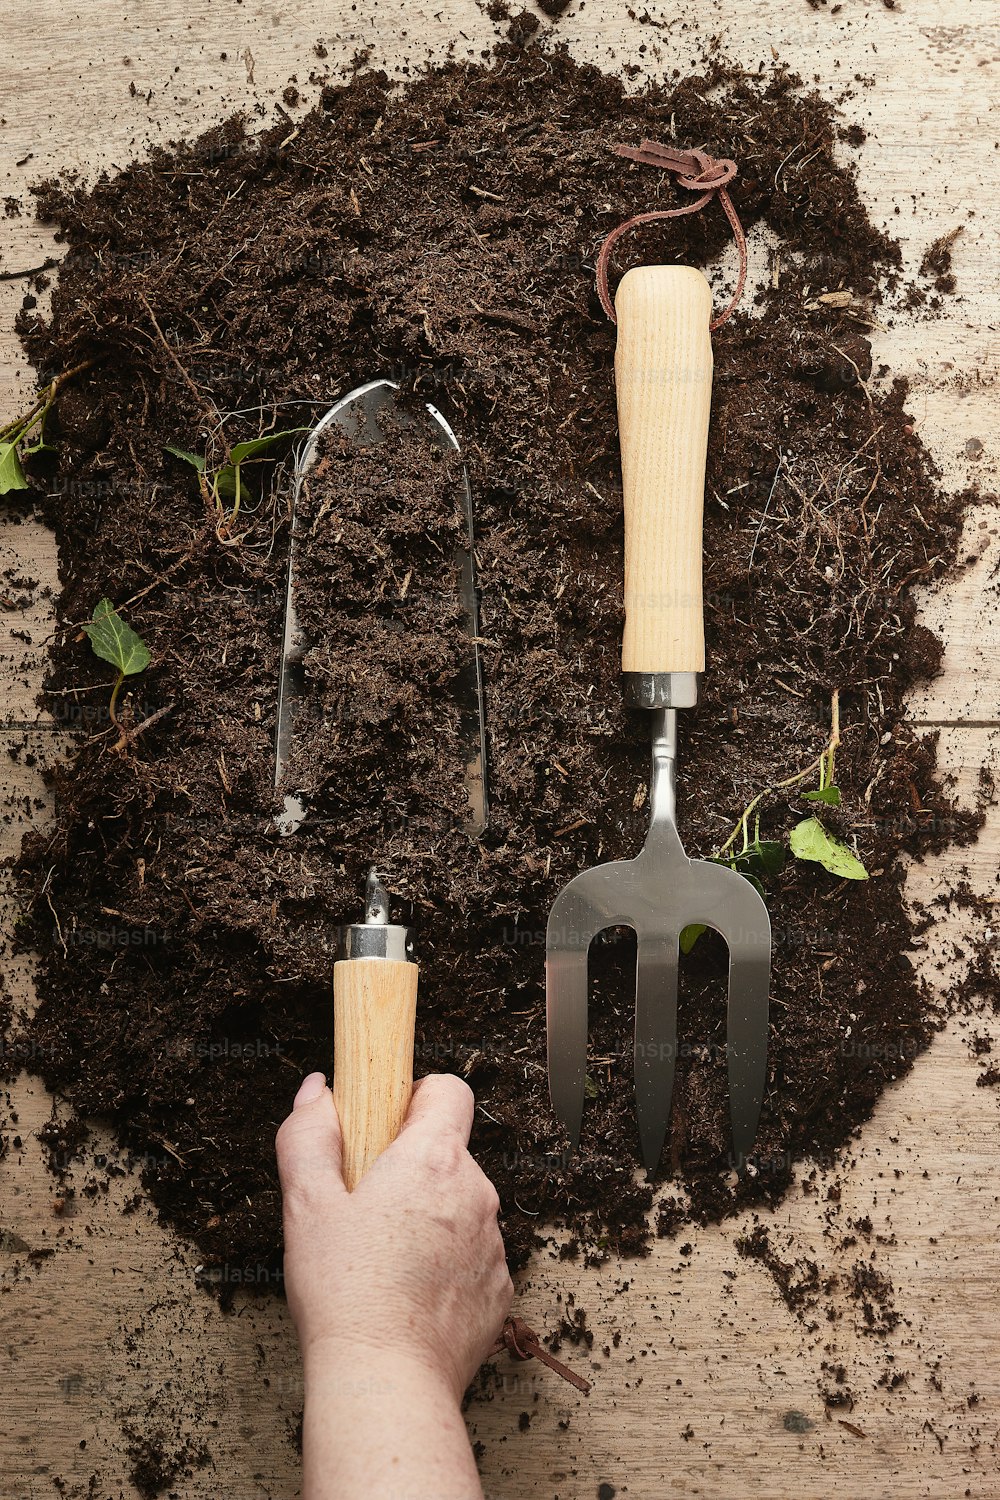 a person holding a garden tool in the dirt